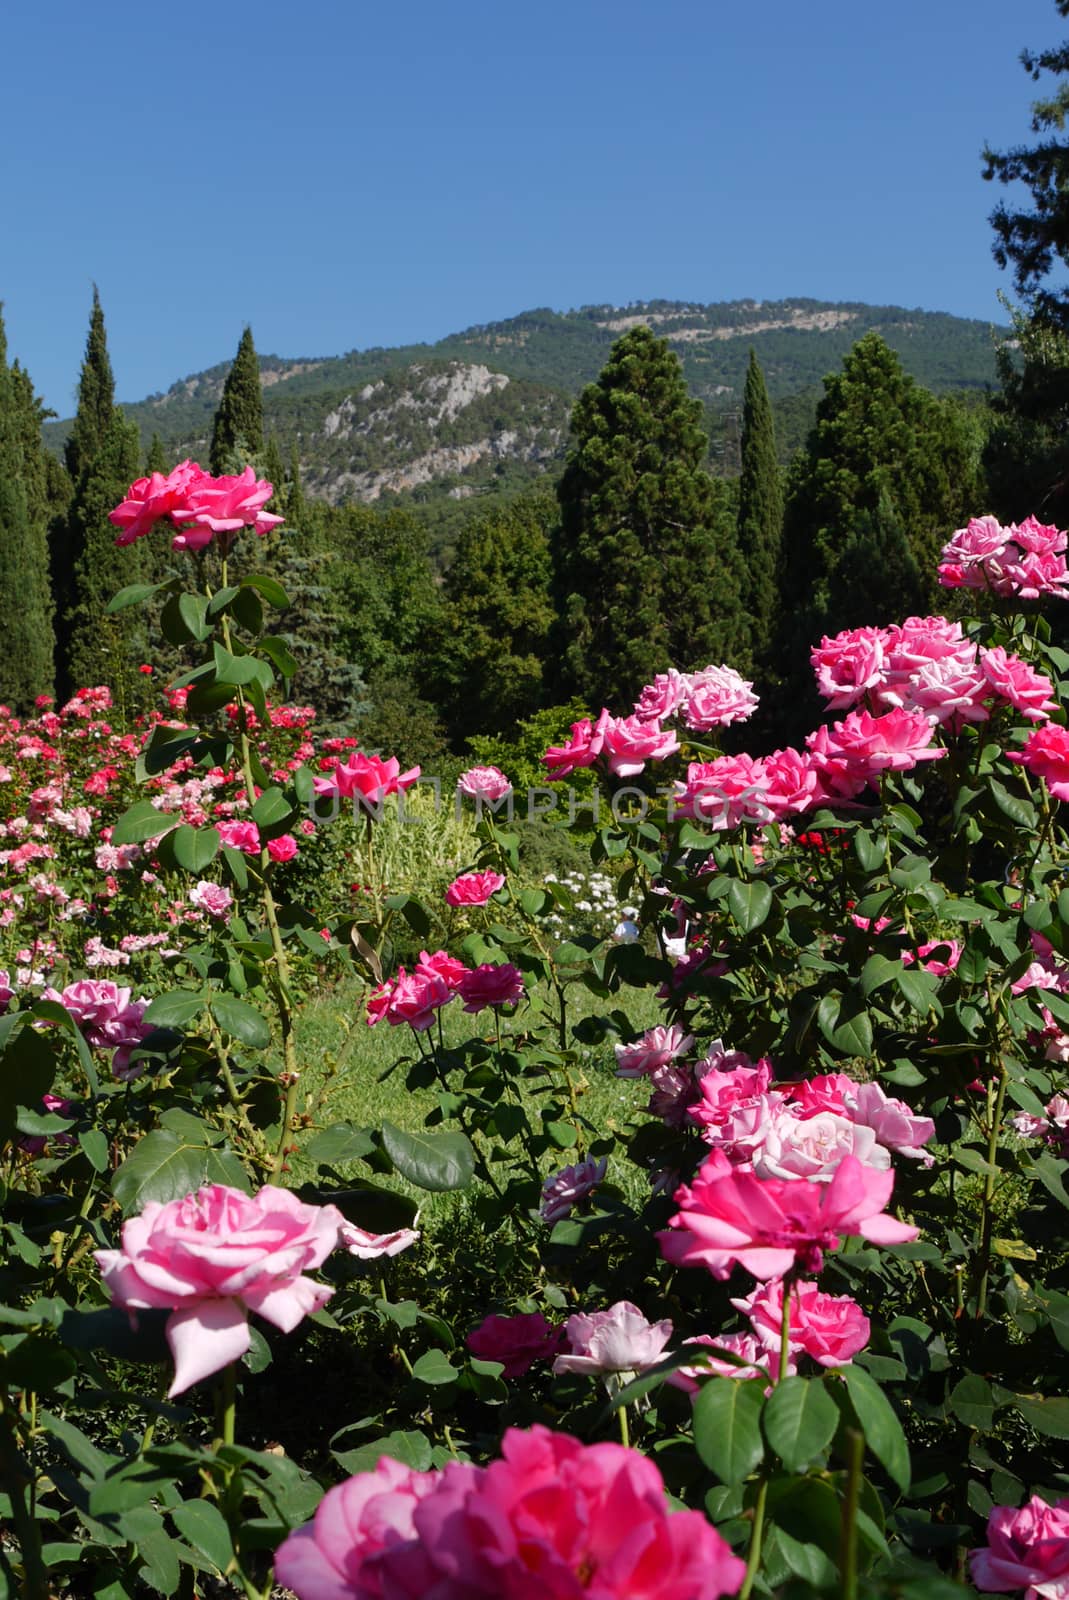 bushes of roses on the background of cypresses in the Crimean mo by Adamchuk